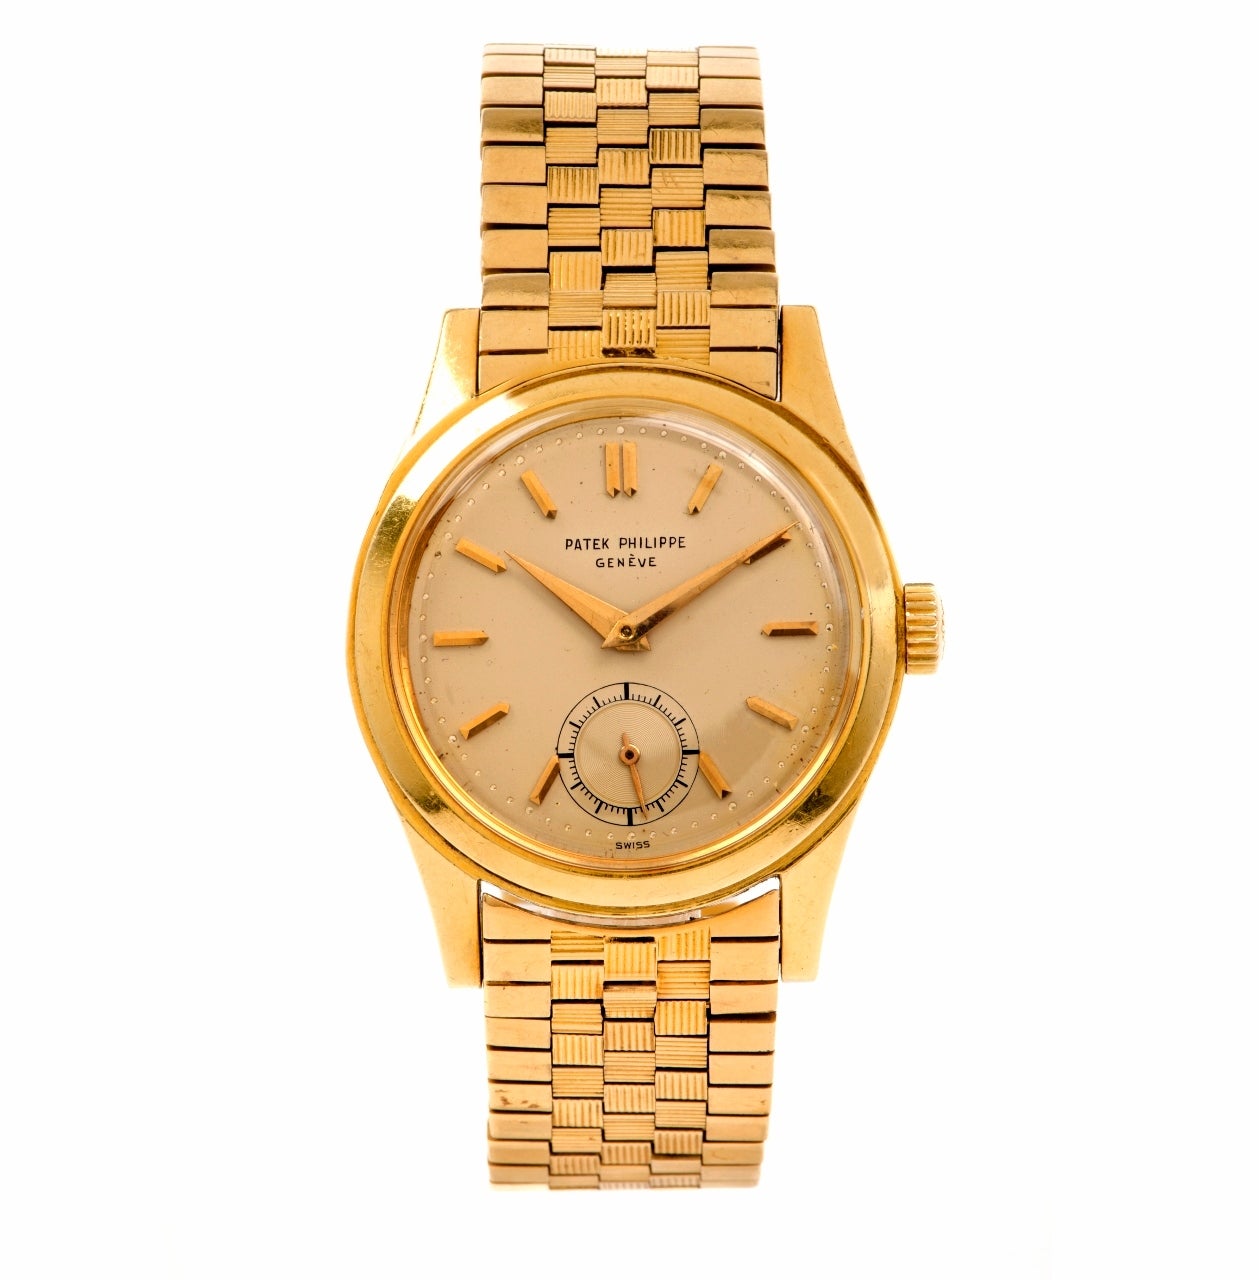 Rare watch with original gold bracelet as marked in its archive paper . Patek Philippe 2483 Calatrava, 18k Yellow Gold on its original patek gold bracelet with an 18k Yellow Gold Buckle, Manual Winding calire 12-400, Small Second Hand, off white